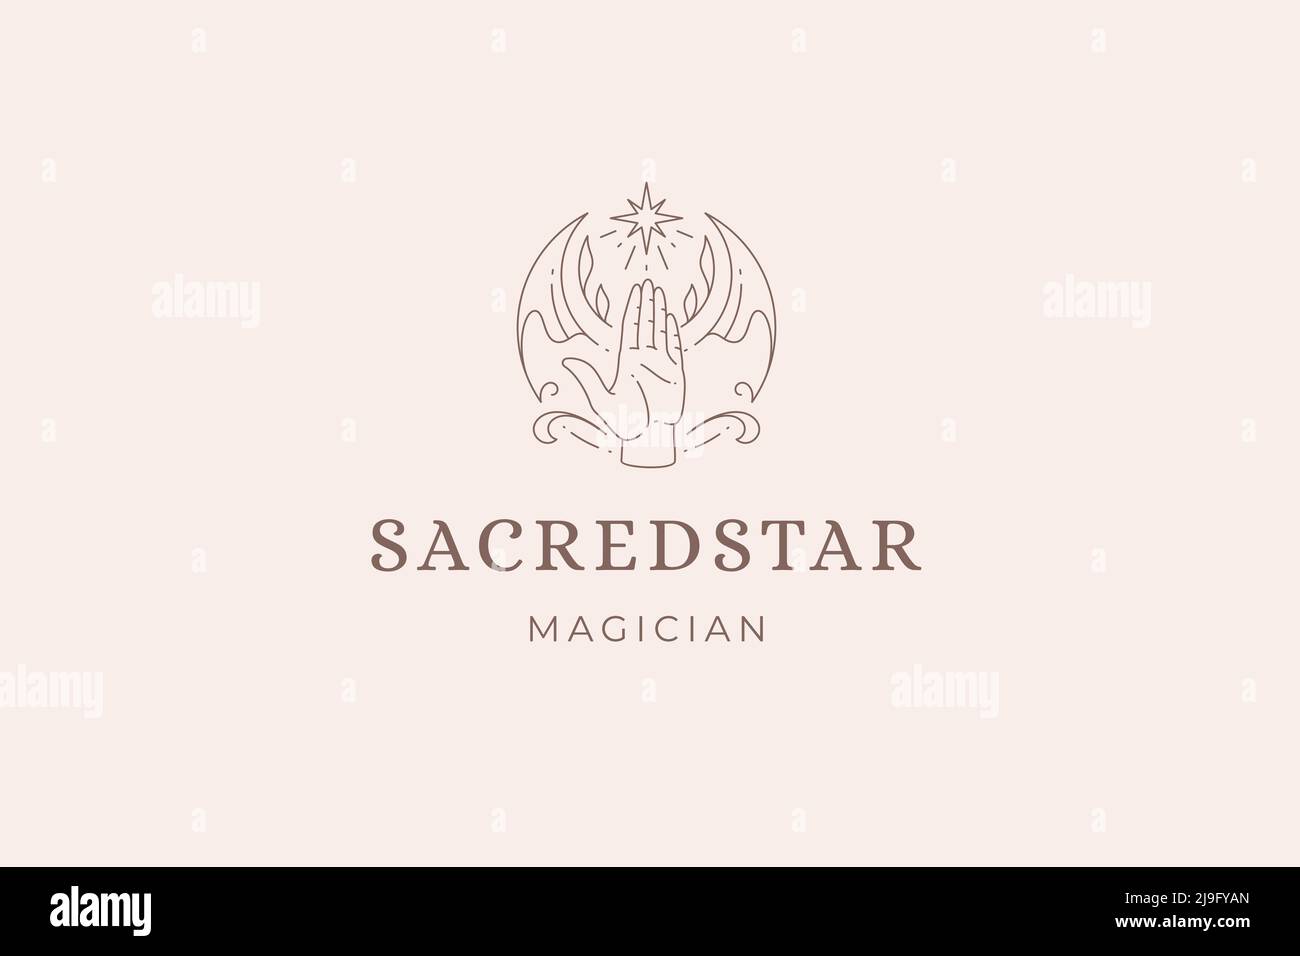 Magic vertical human hand open palm with half moon and bright shining star botany design line art logo vector illustration. Esoteric mystery spiritual Stock Vector